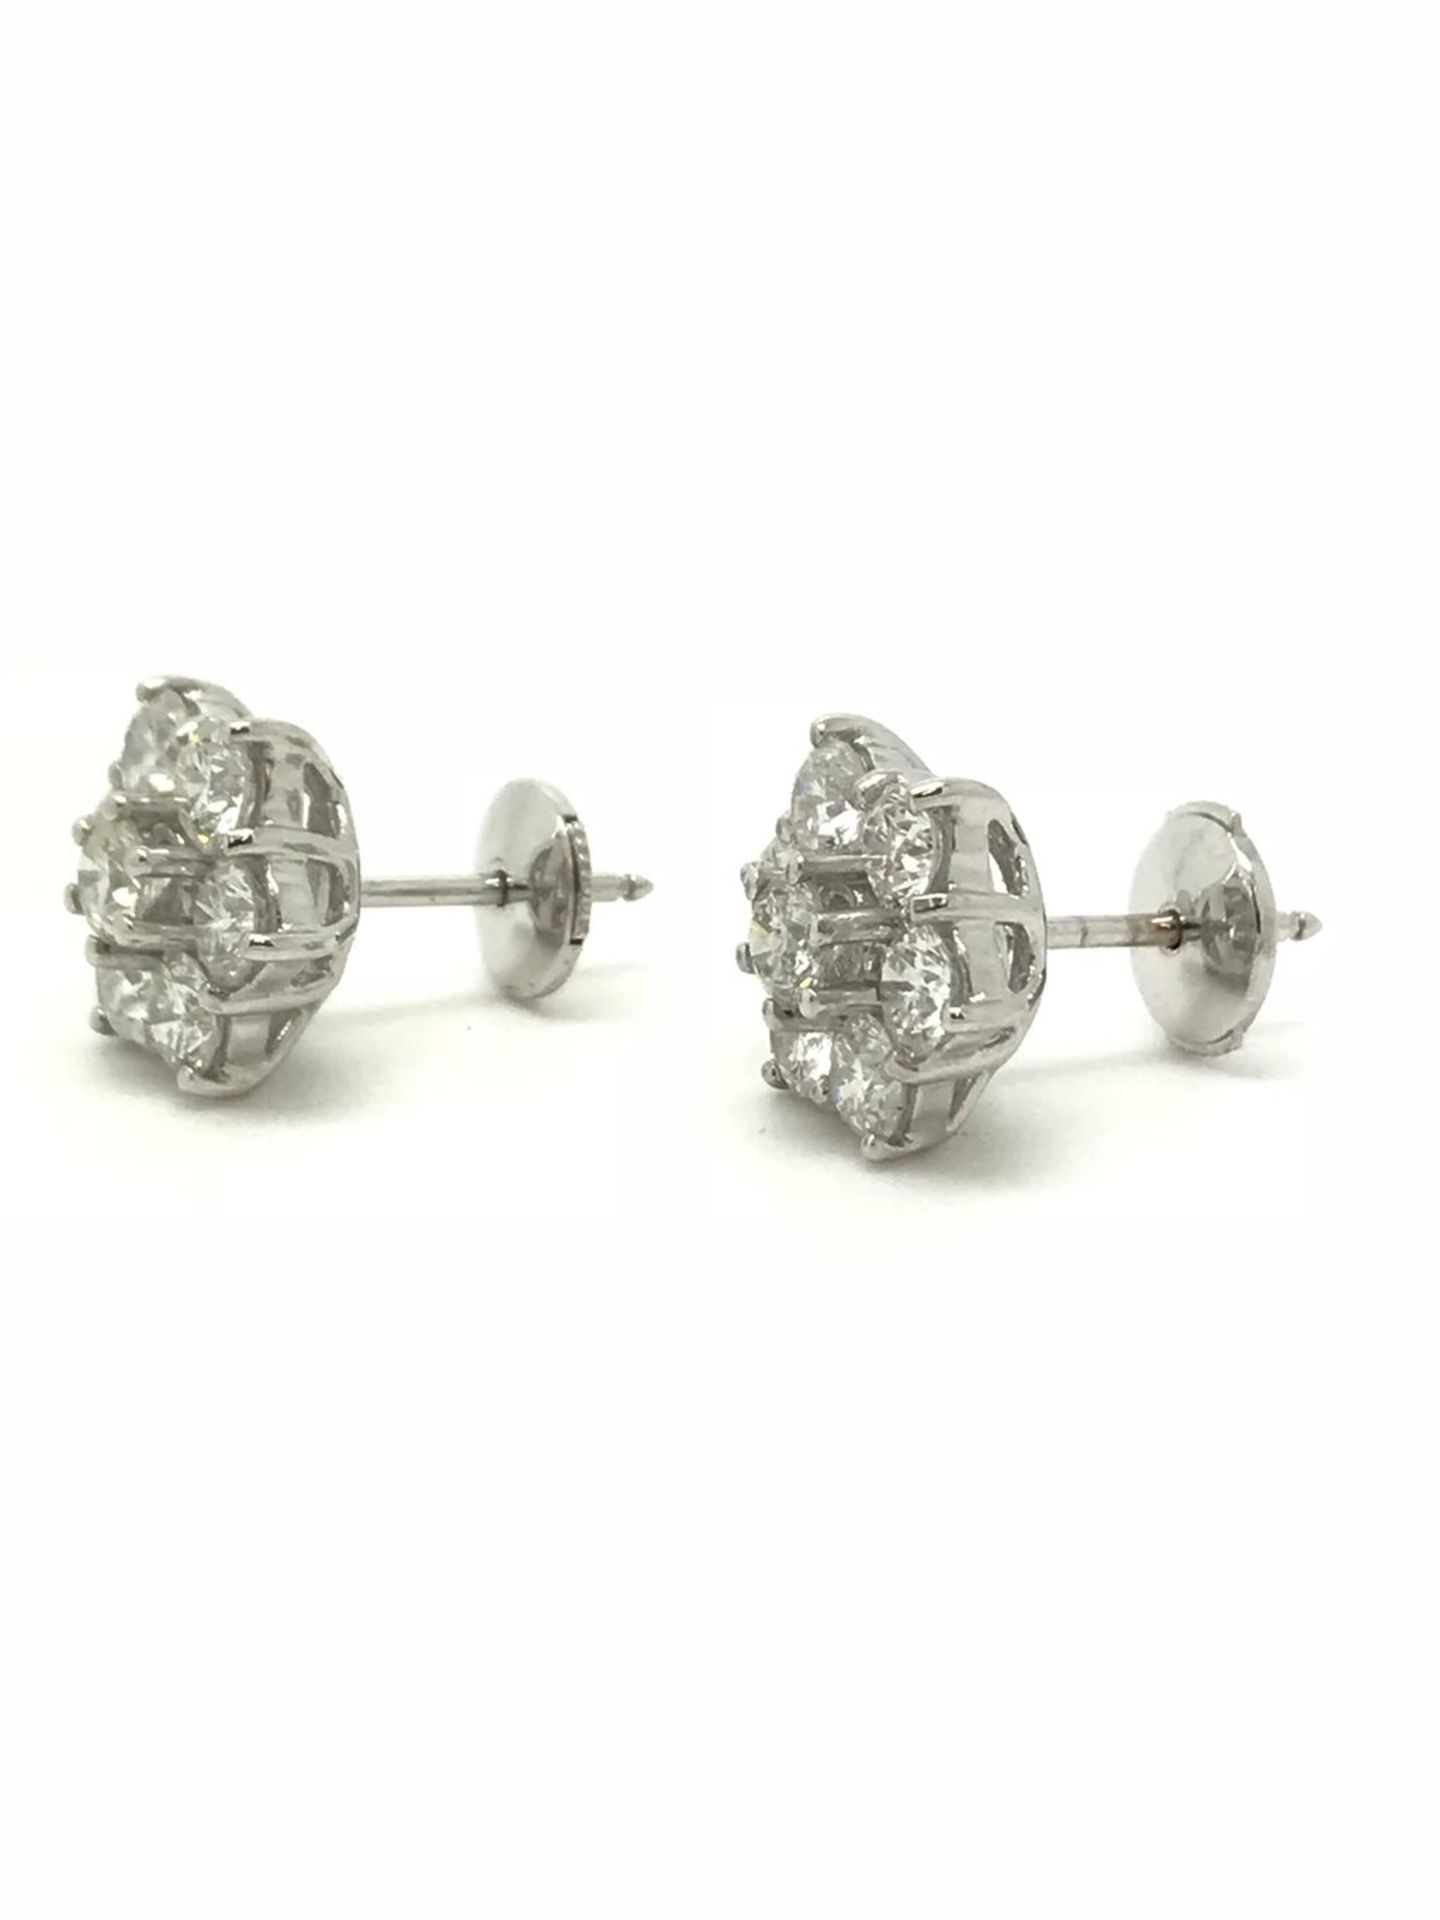 2ct Diamond Cluster Earrings, 18ct White Gold - Image 2 of 5